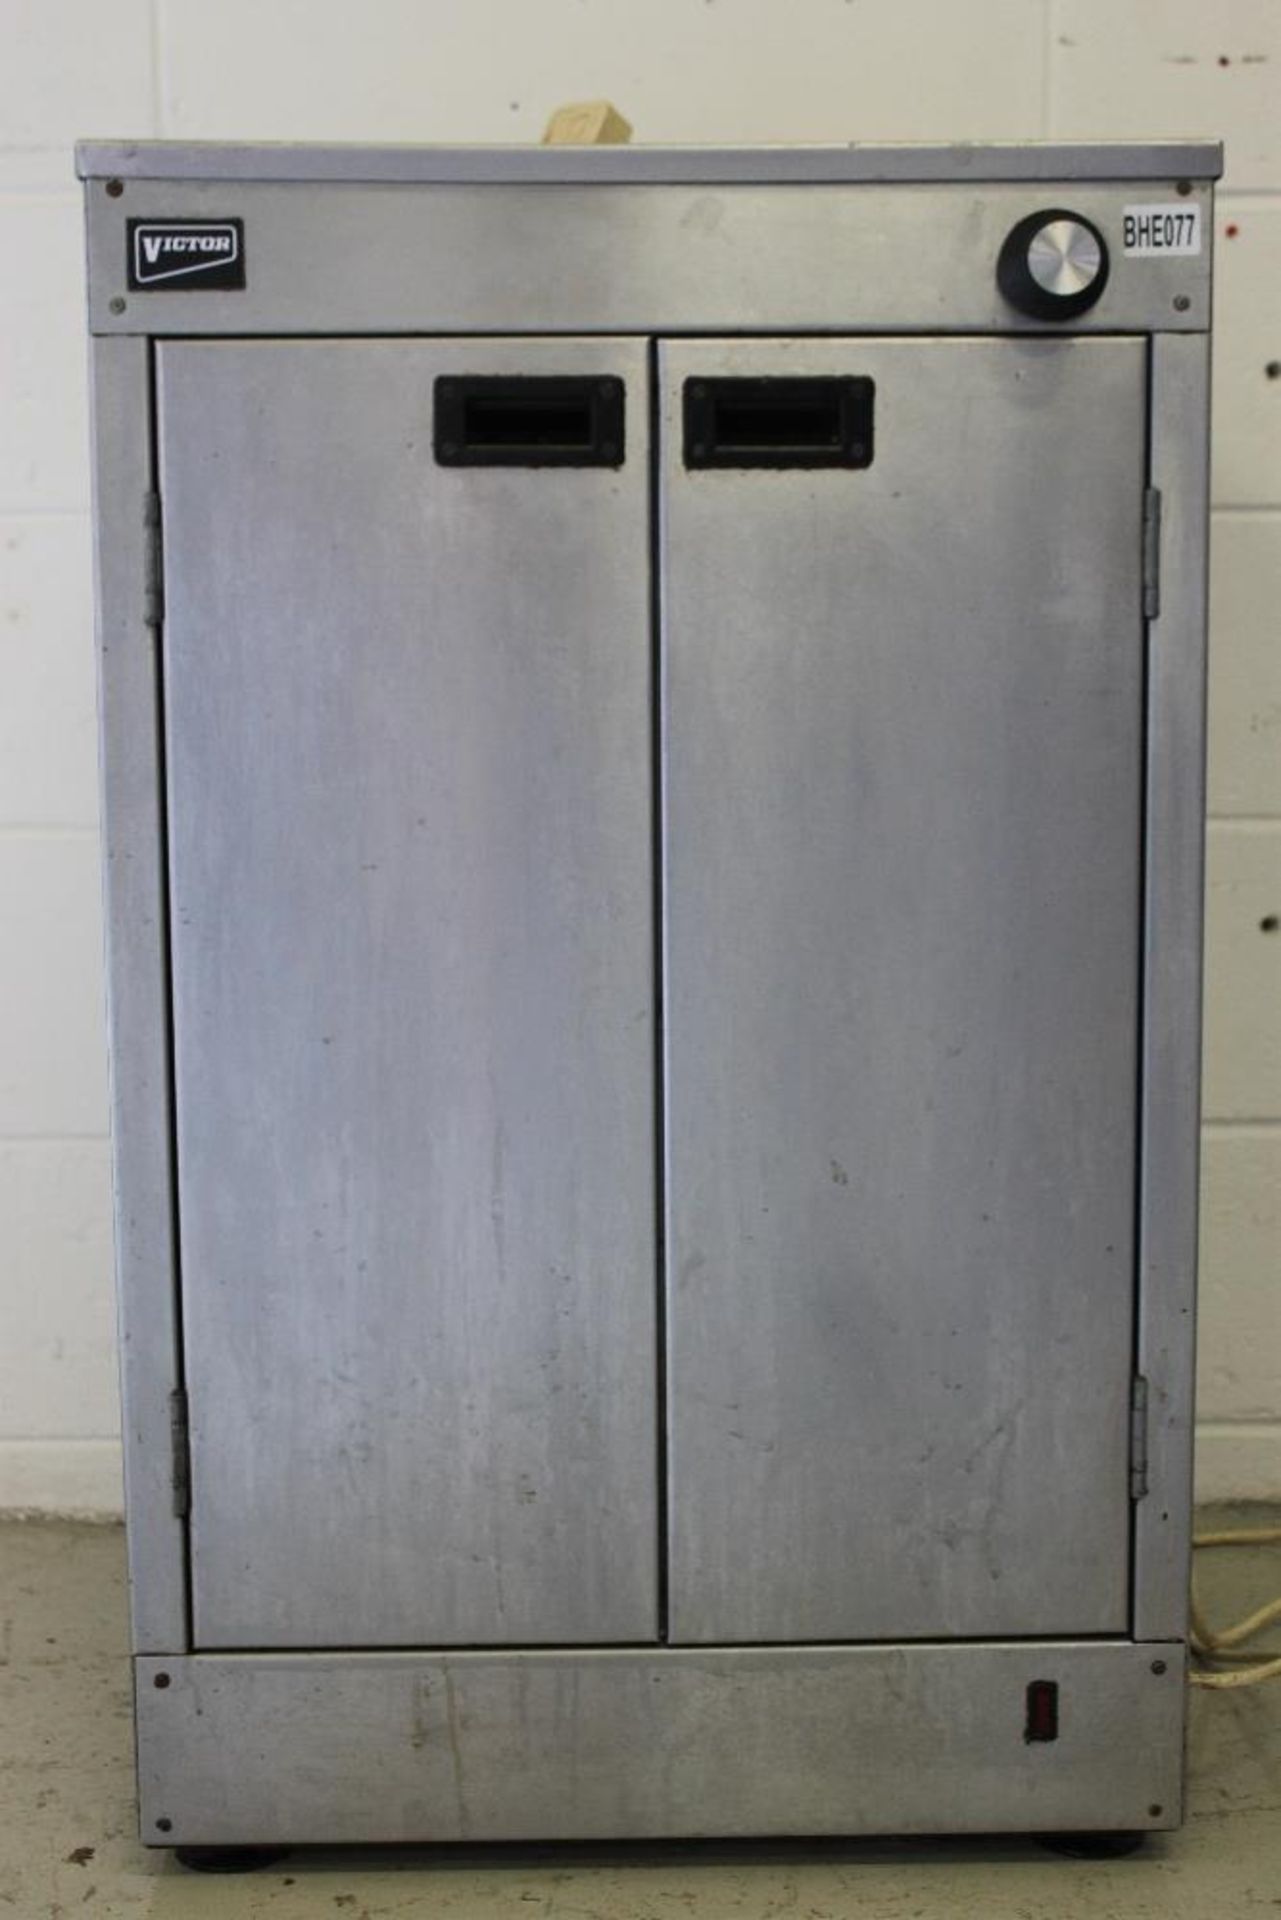 Victor Stainless Steel Plate Warming Cupboard -1ph – Tested Working W58cm x H90cm x D58cm - Image 2 of 2